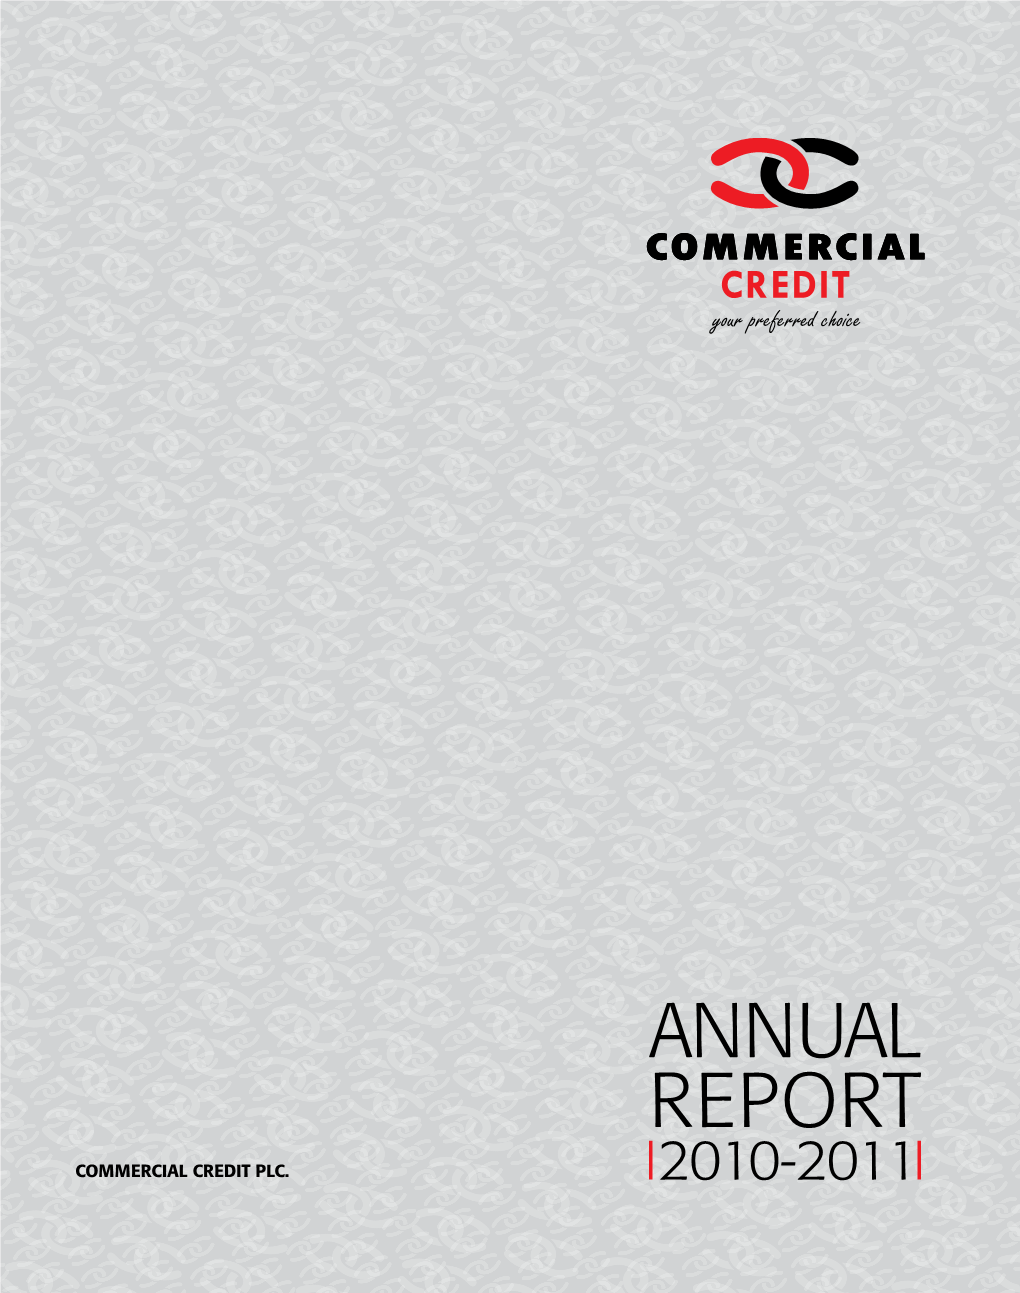 Annual Report Commercial Credit Plc